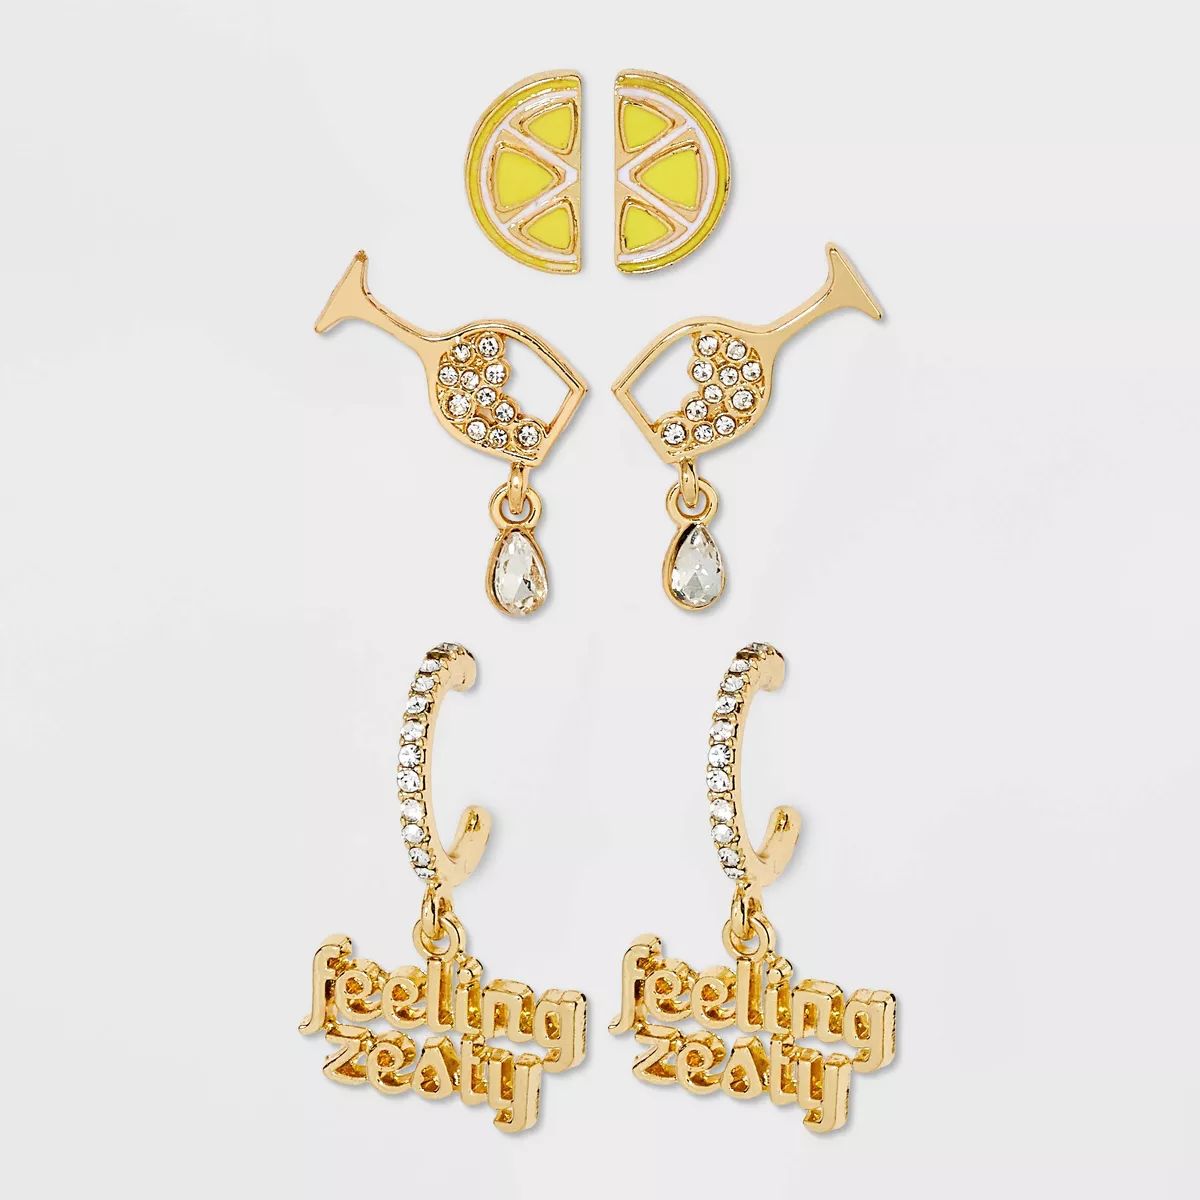 SUGARFIX by BaubleBar with a Twist Earrings - Gold | Target